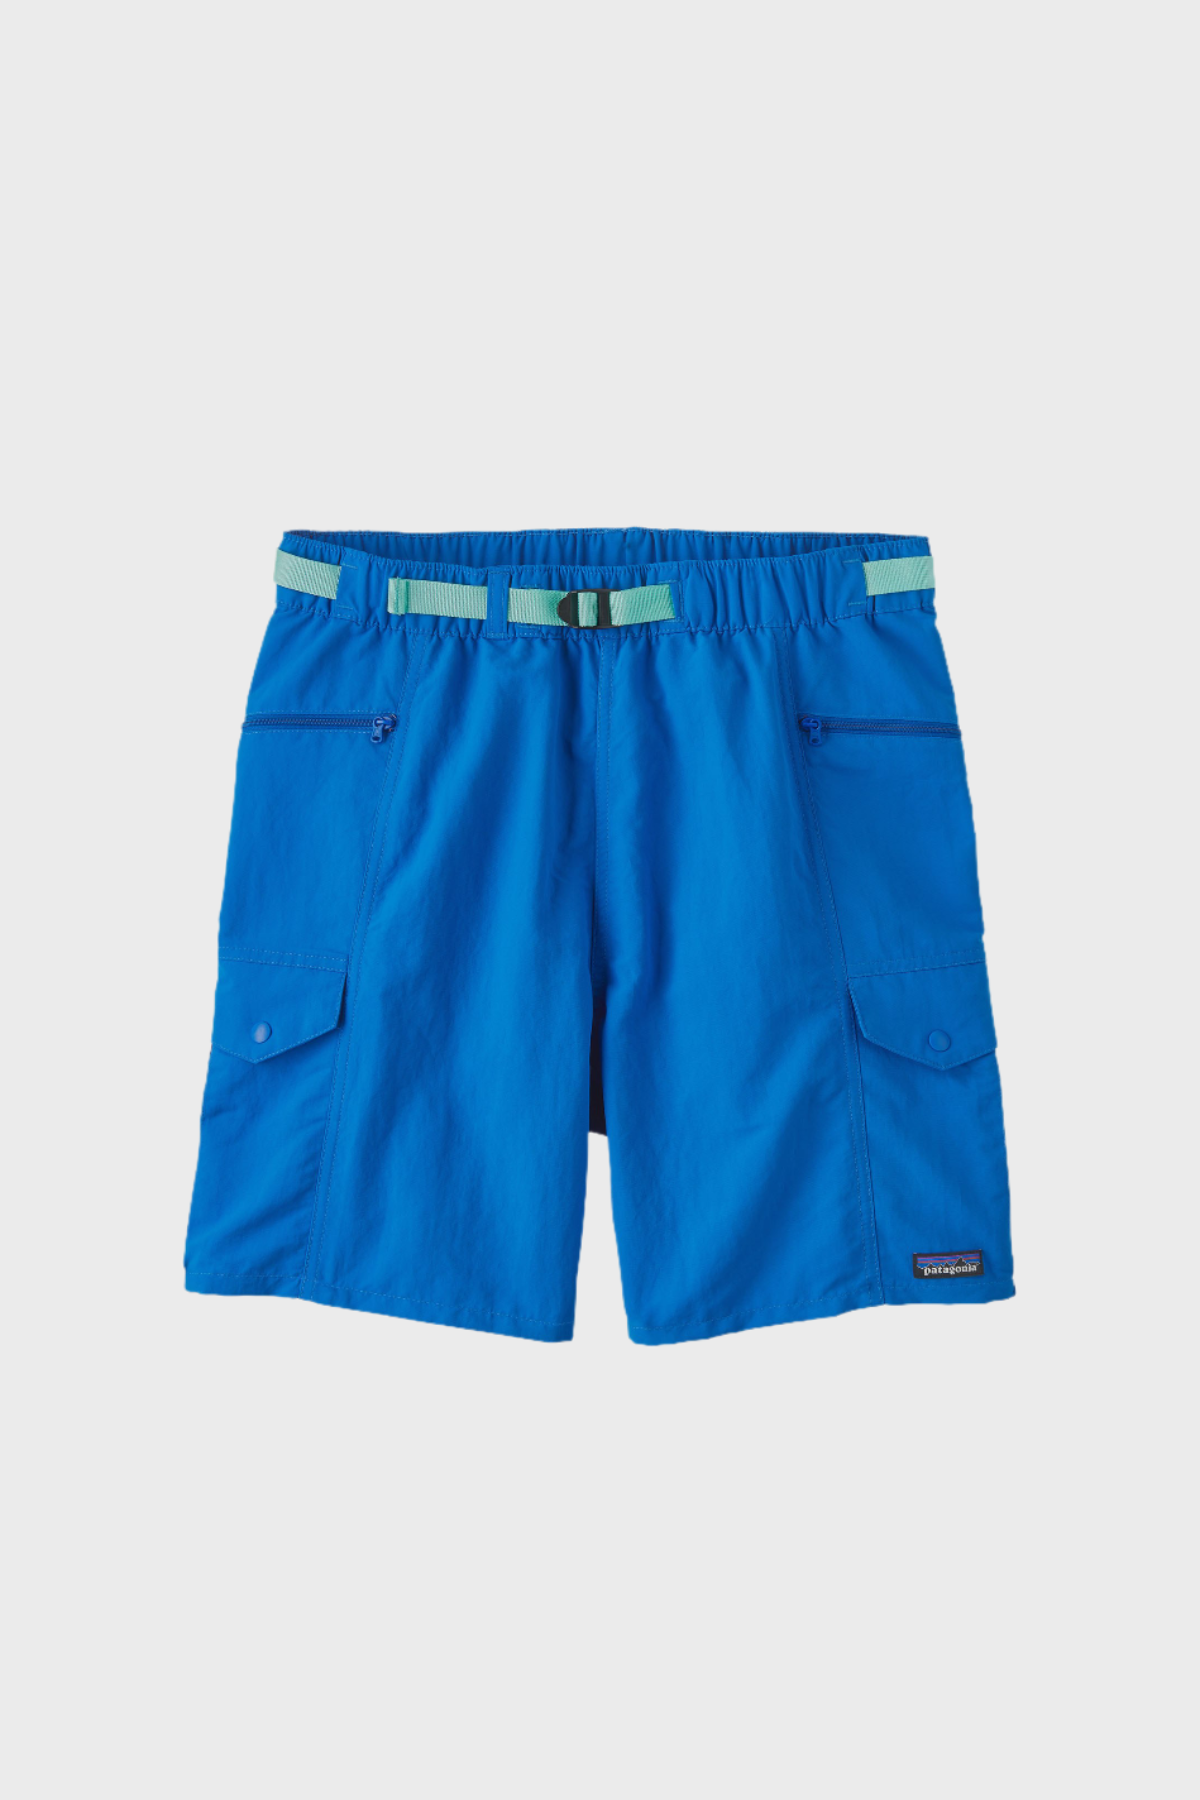 Patagonia - Outdoor Everyday 7" Shorts